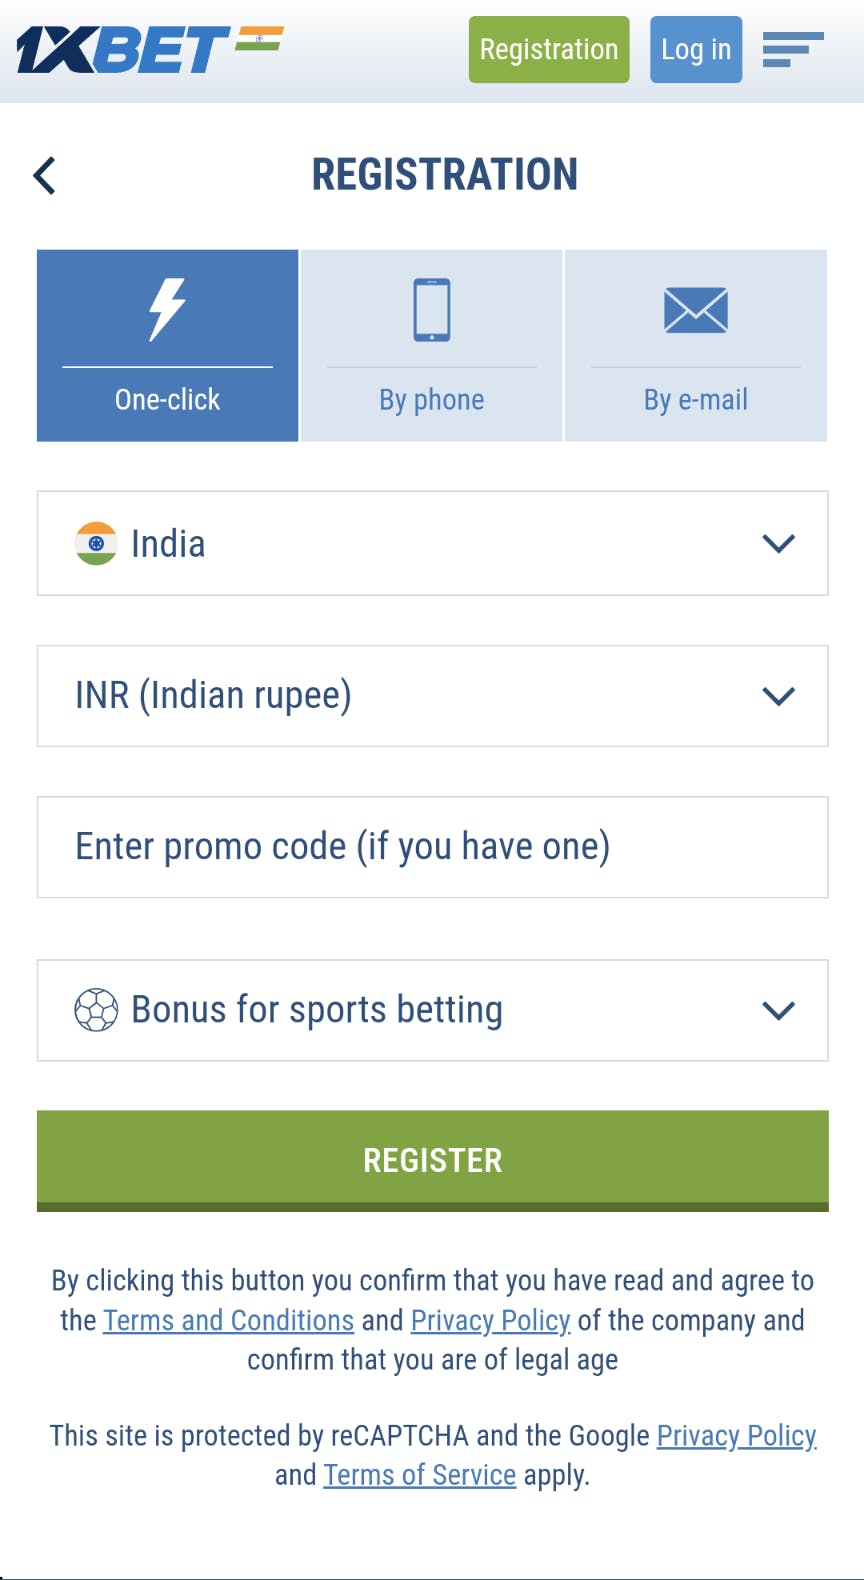 1xBet app registration by one click in India.